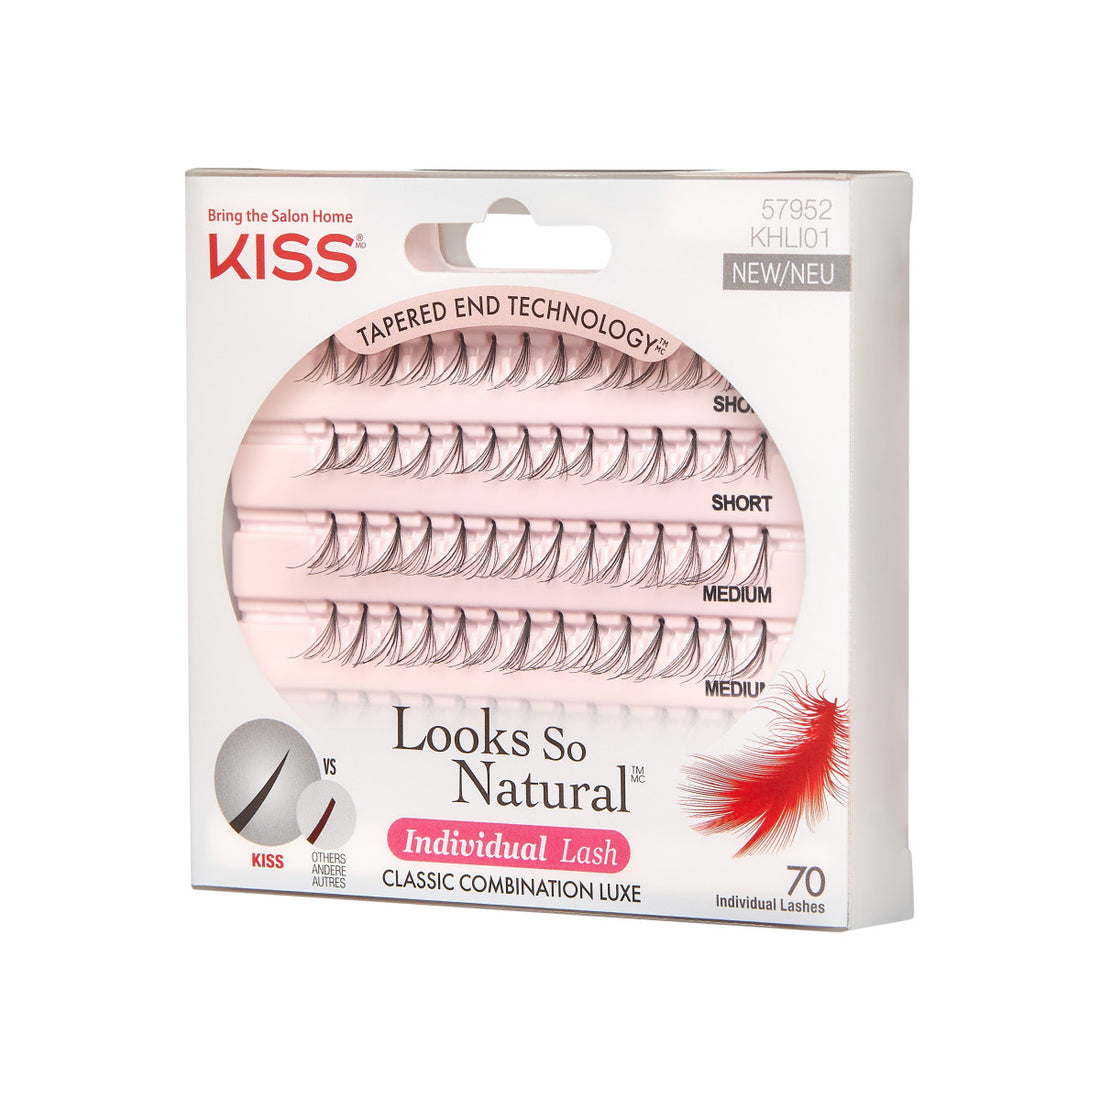 KISS Looks So Natural Individual Lash Clusters, Classic Combination Luxe, 70 ks